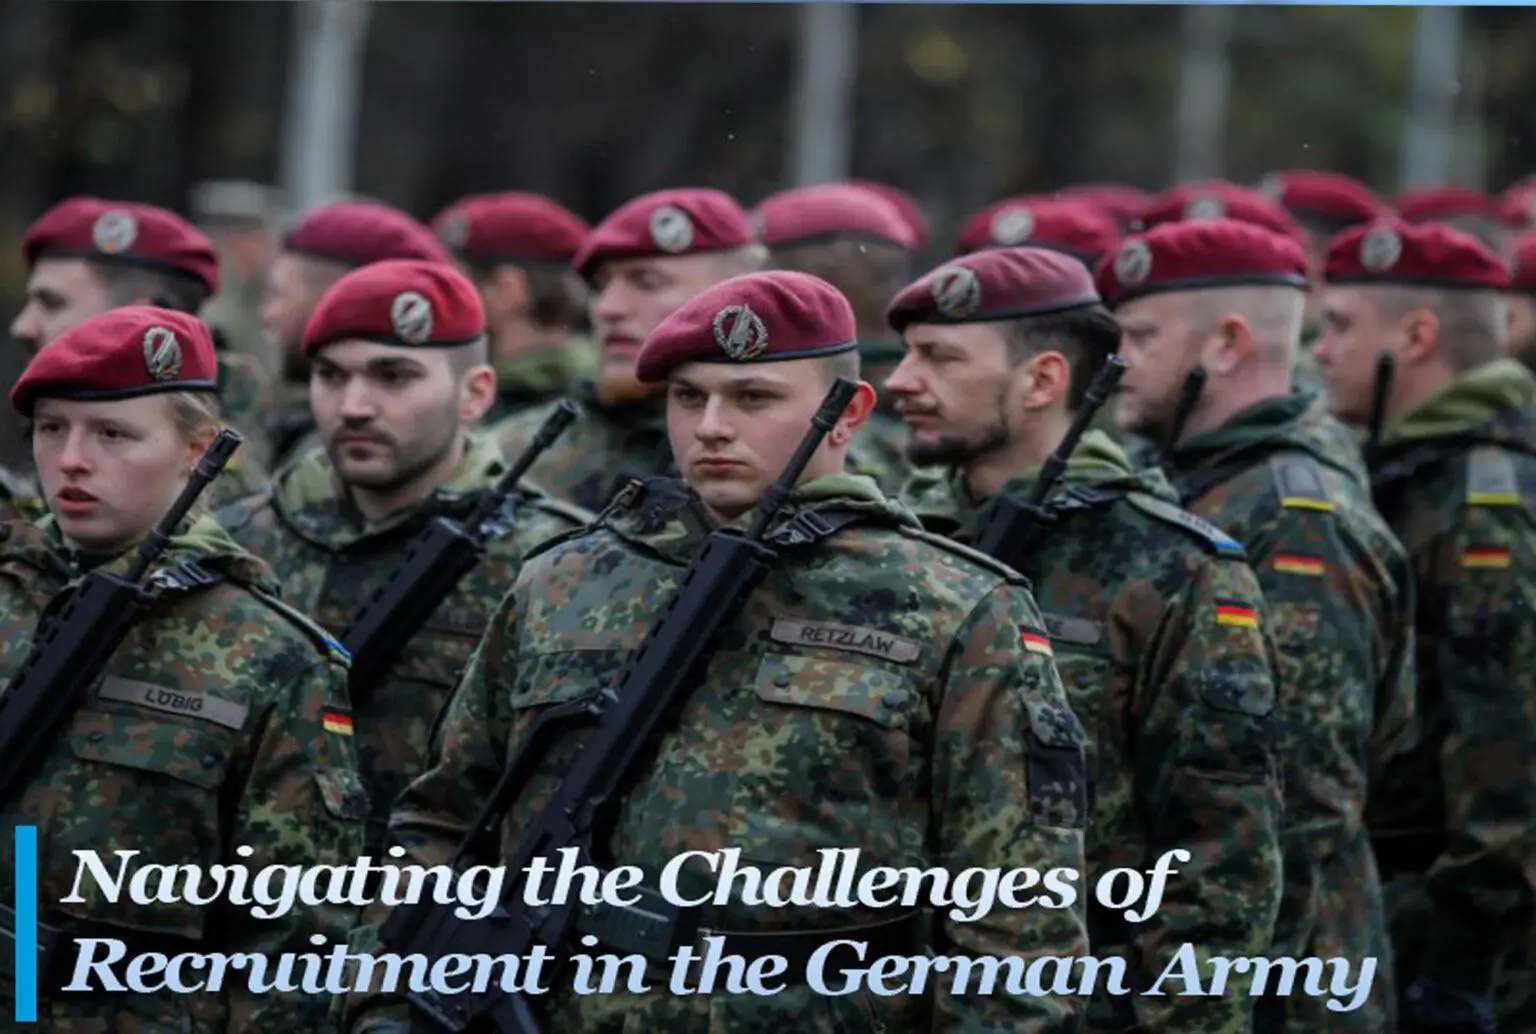 Recruitment in the German Army